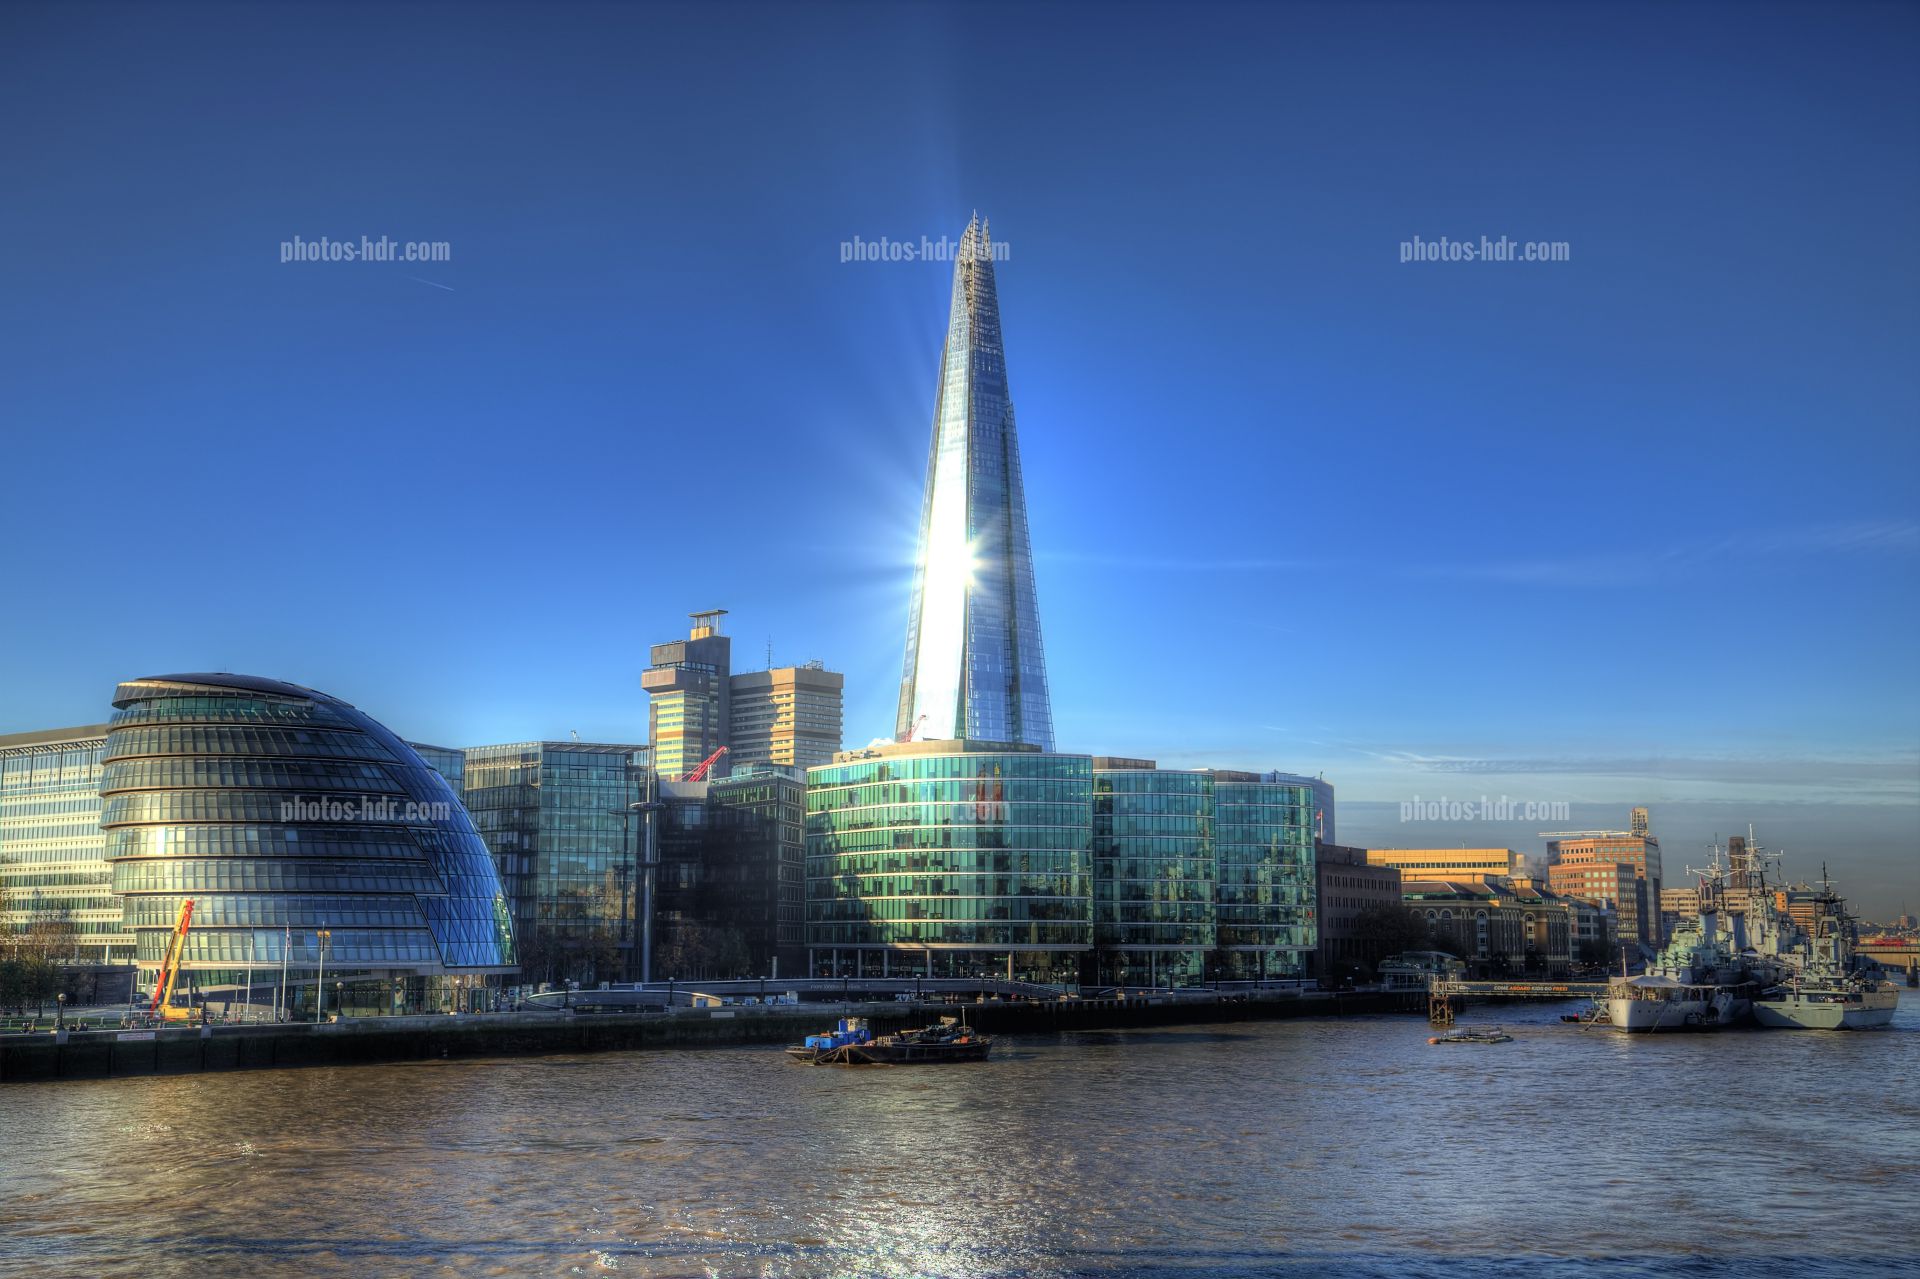 /London City hall and the Shard from the thames